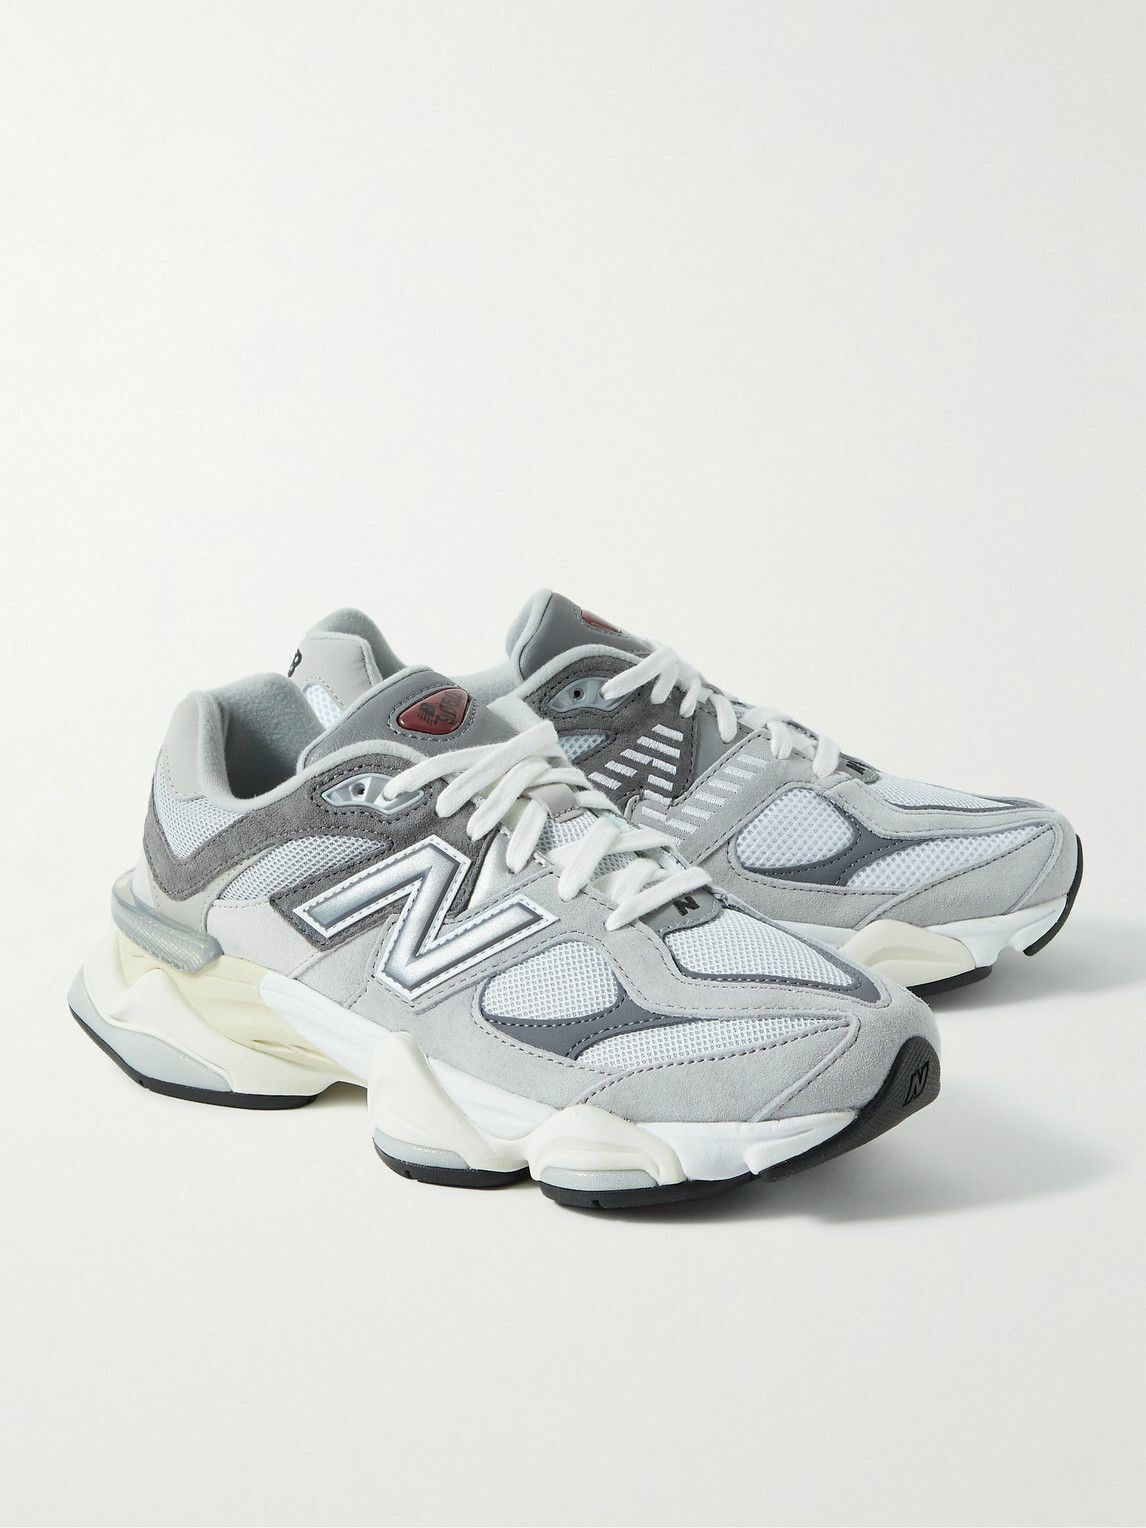 New Balance - 9060 Suede, Leather and Mesh Sneakers - Gray